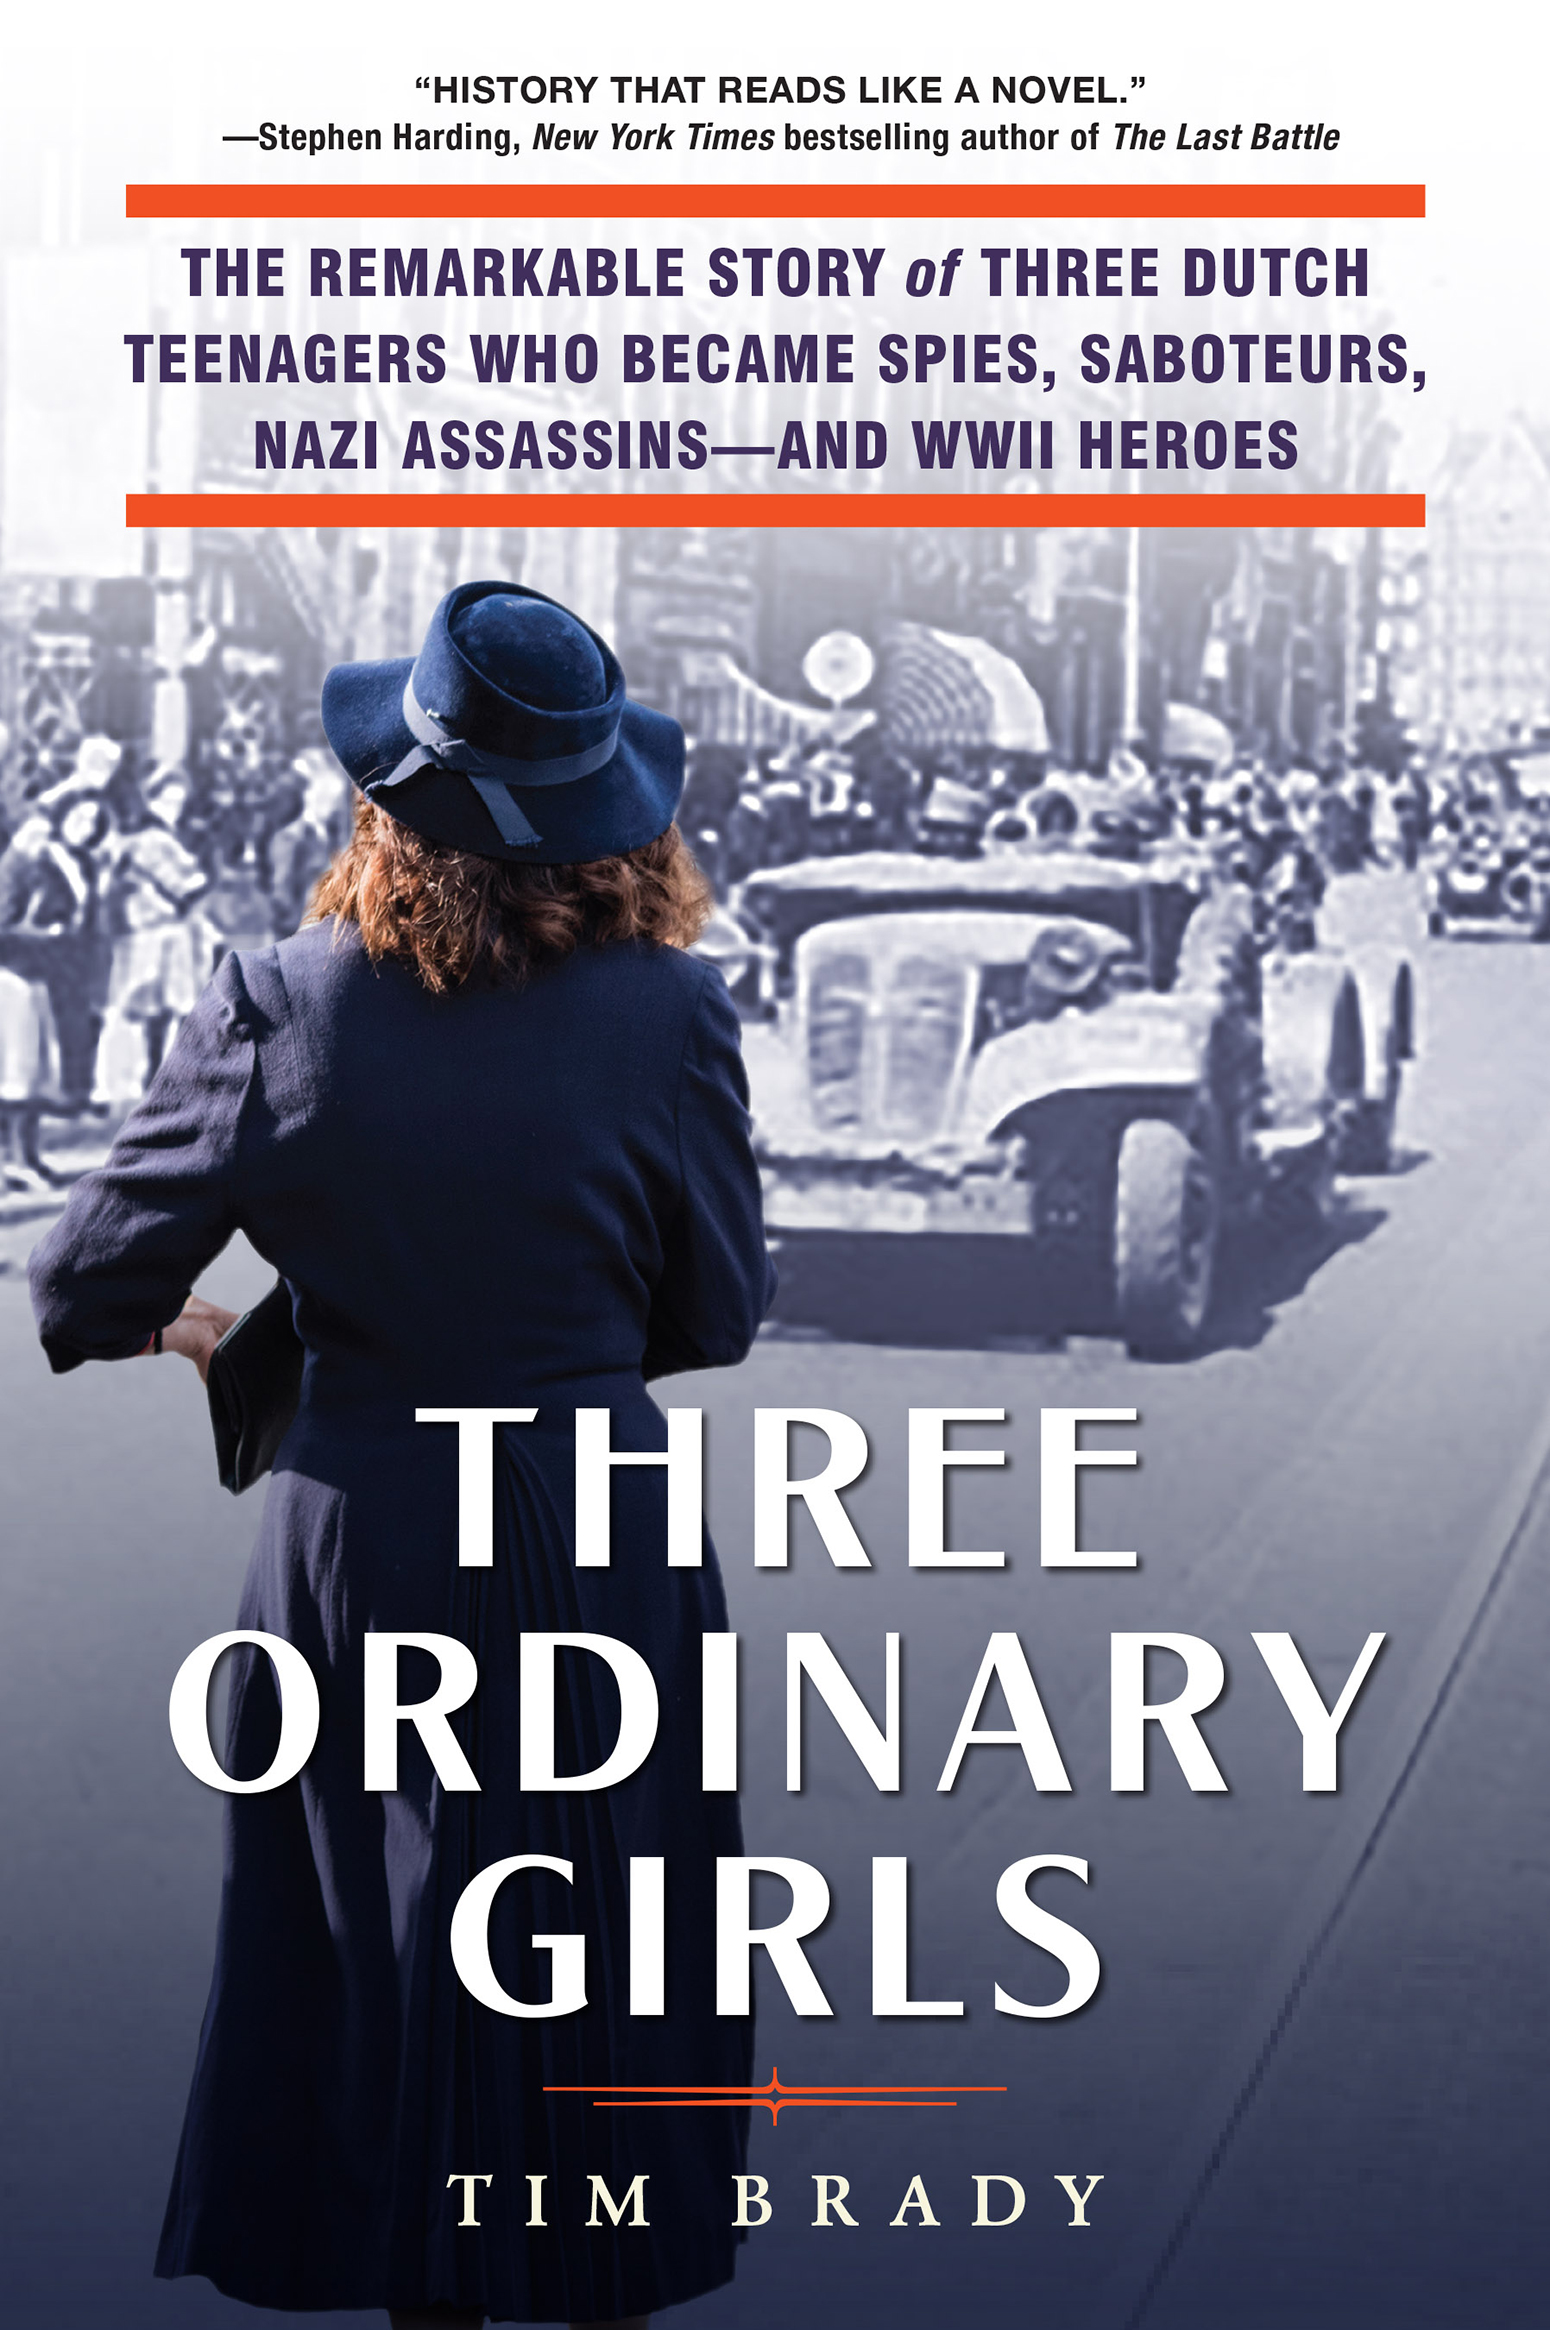 Three Ordinary Girls The Remarkable Story of Three Dutch Teenagers Who Became Spies, Saboteurs, Nazi Assassins–and WWII Heroes cover image